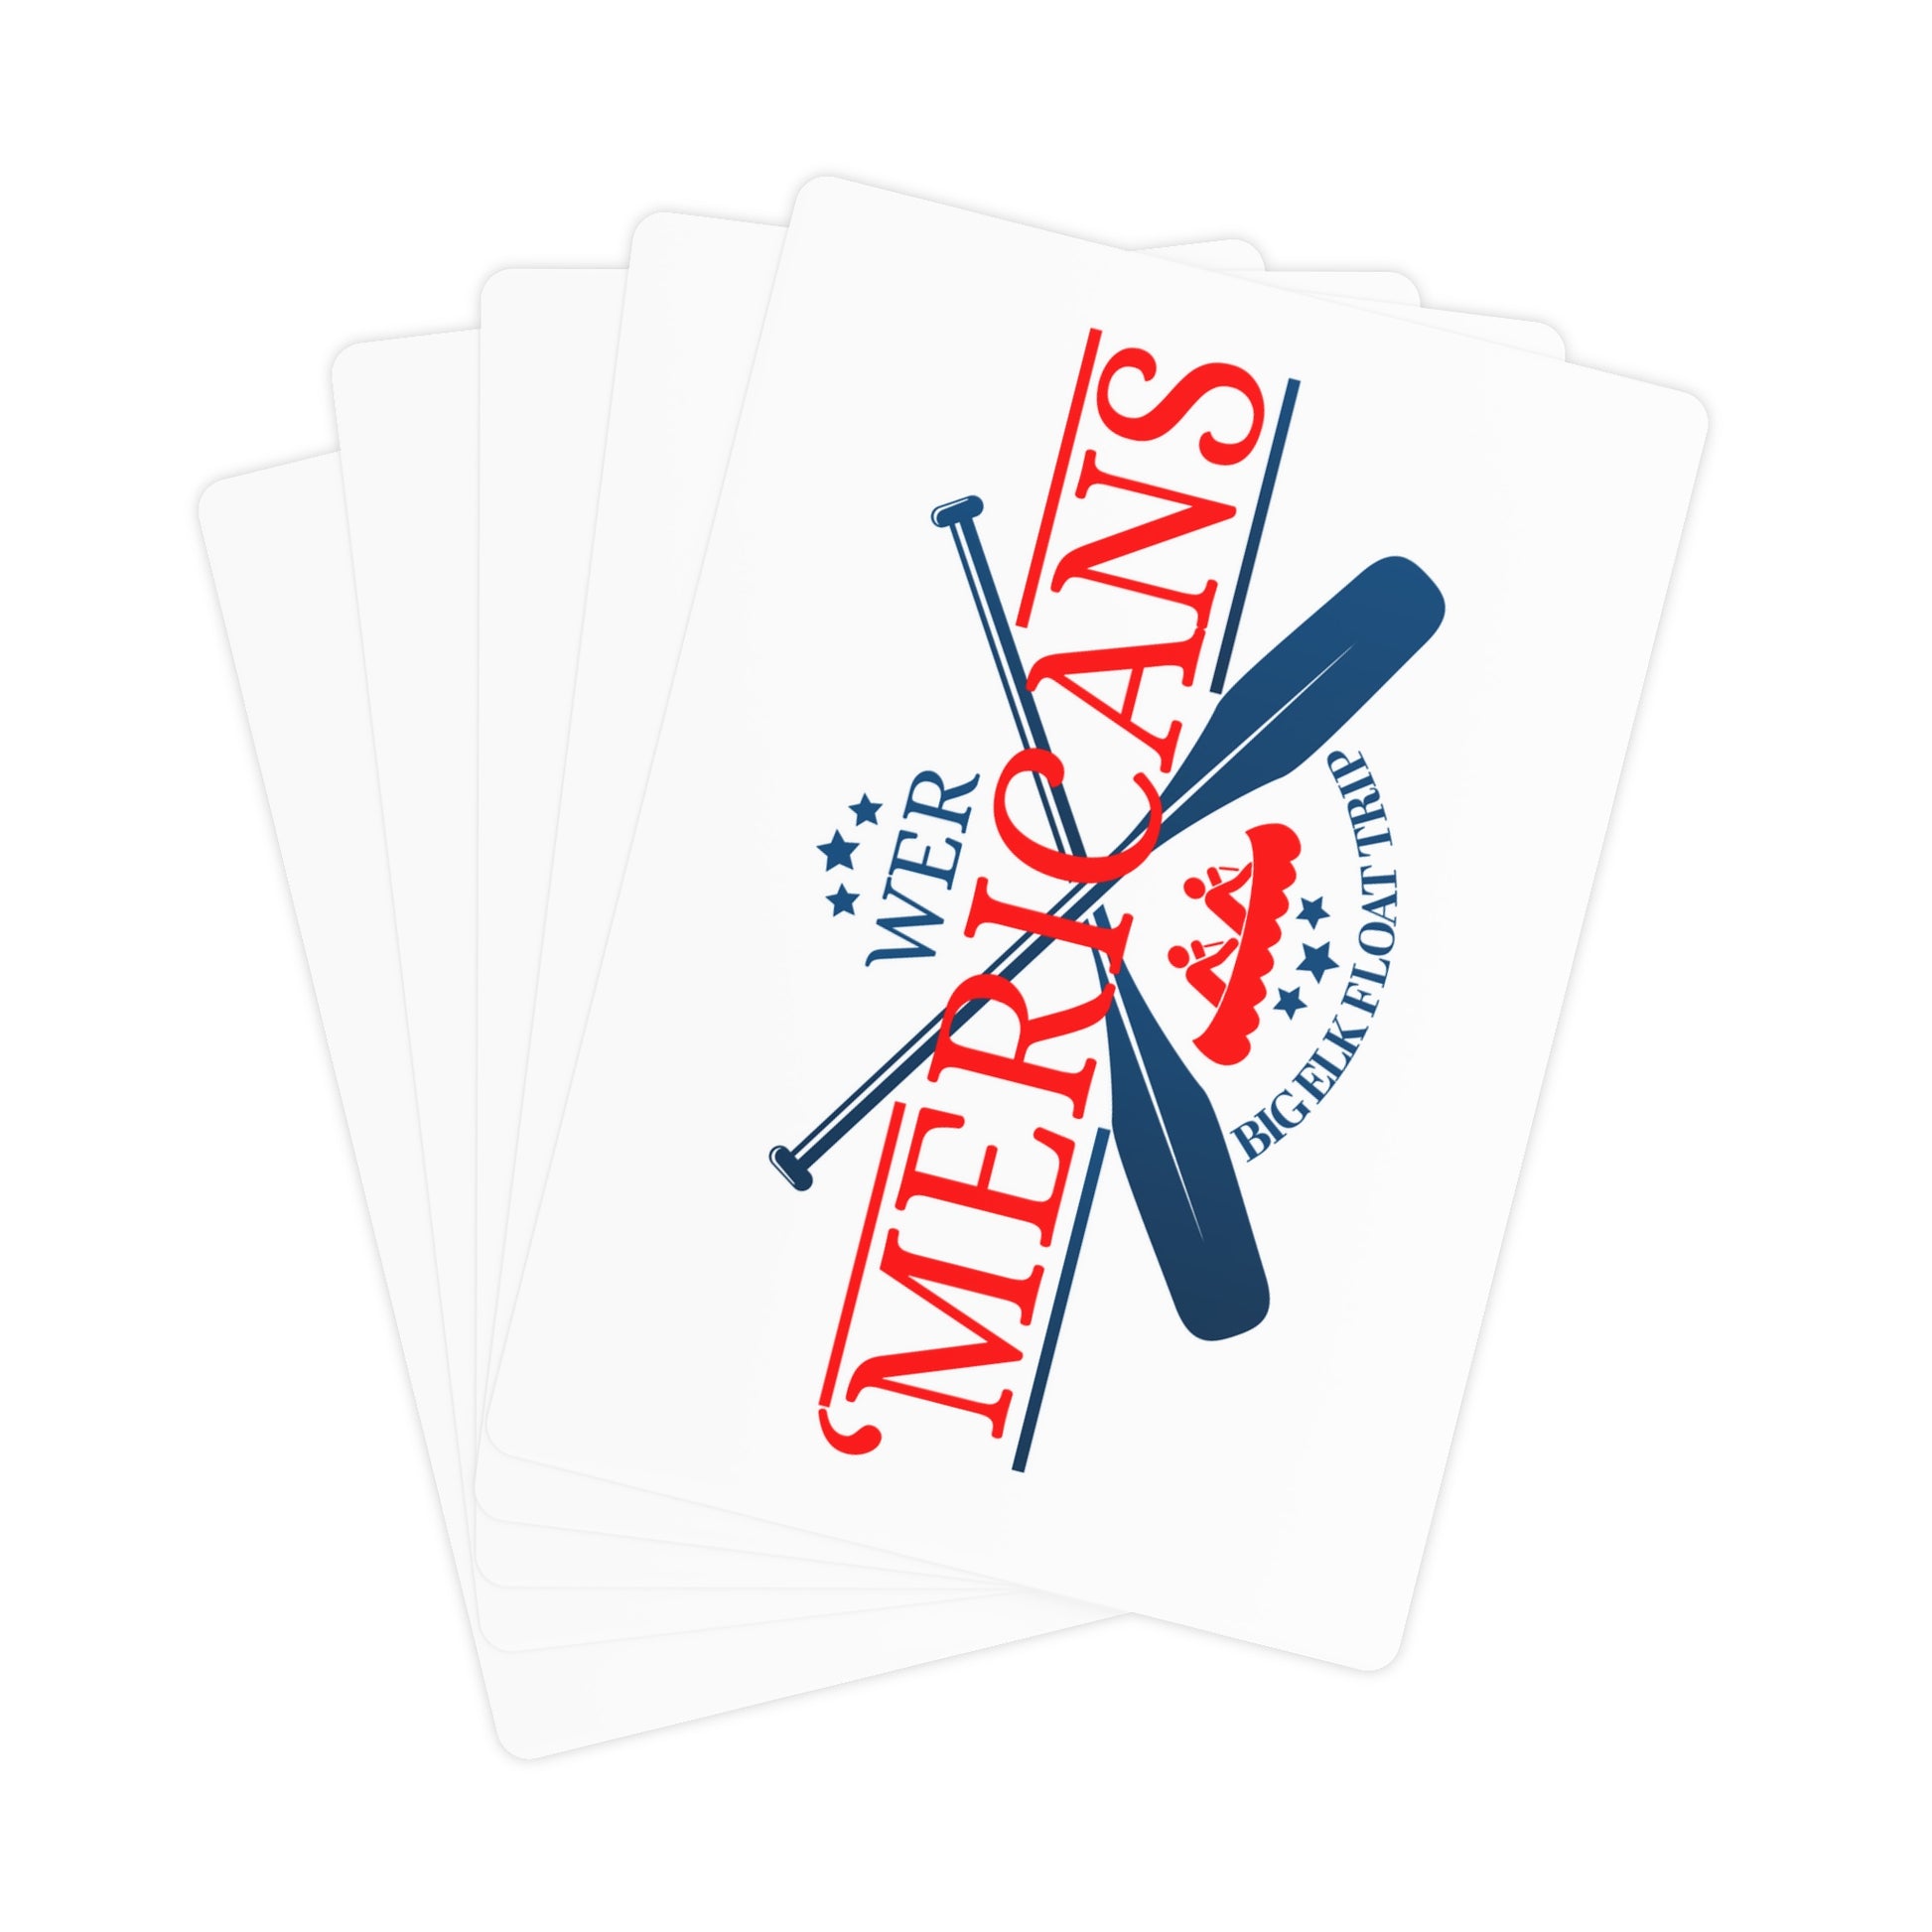 LIMITED EDITION 'MERICANS Poker Cards - Expressive DeZien 